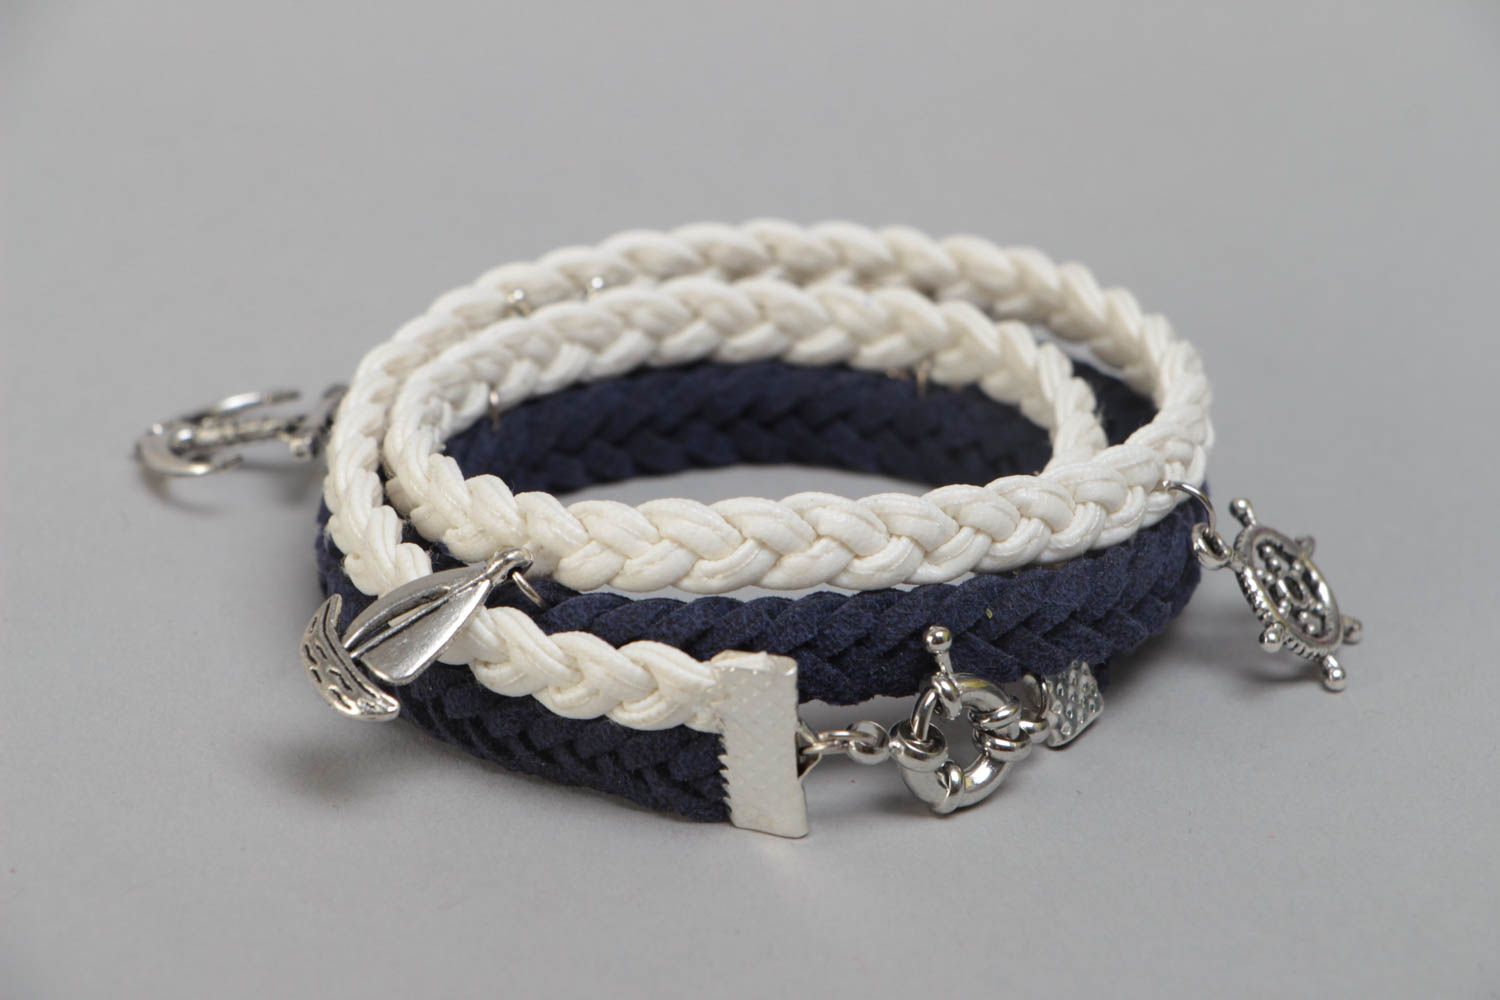 Handmade multi row wrist bracelet woven of suede cord in marine style with charm photo 4